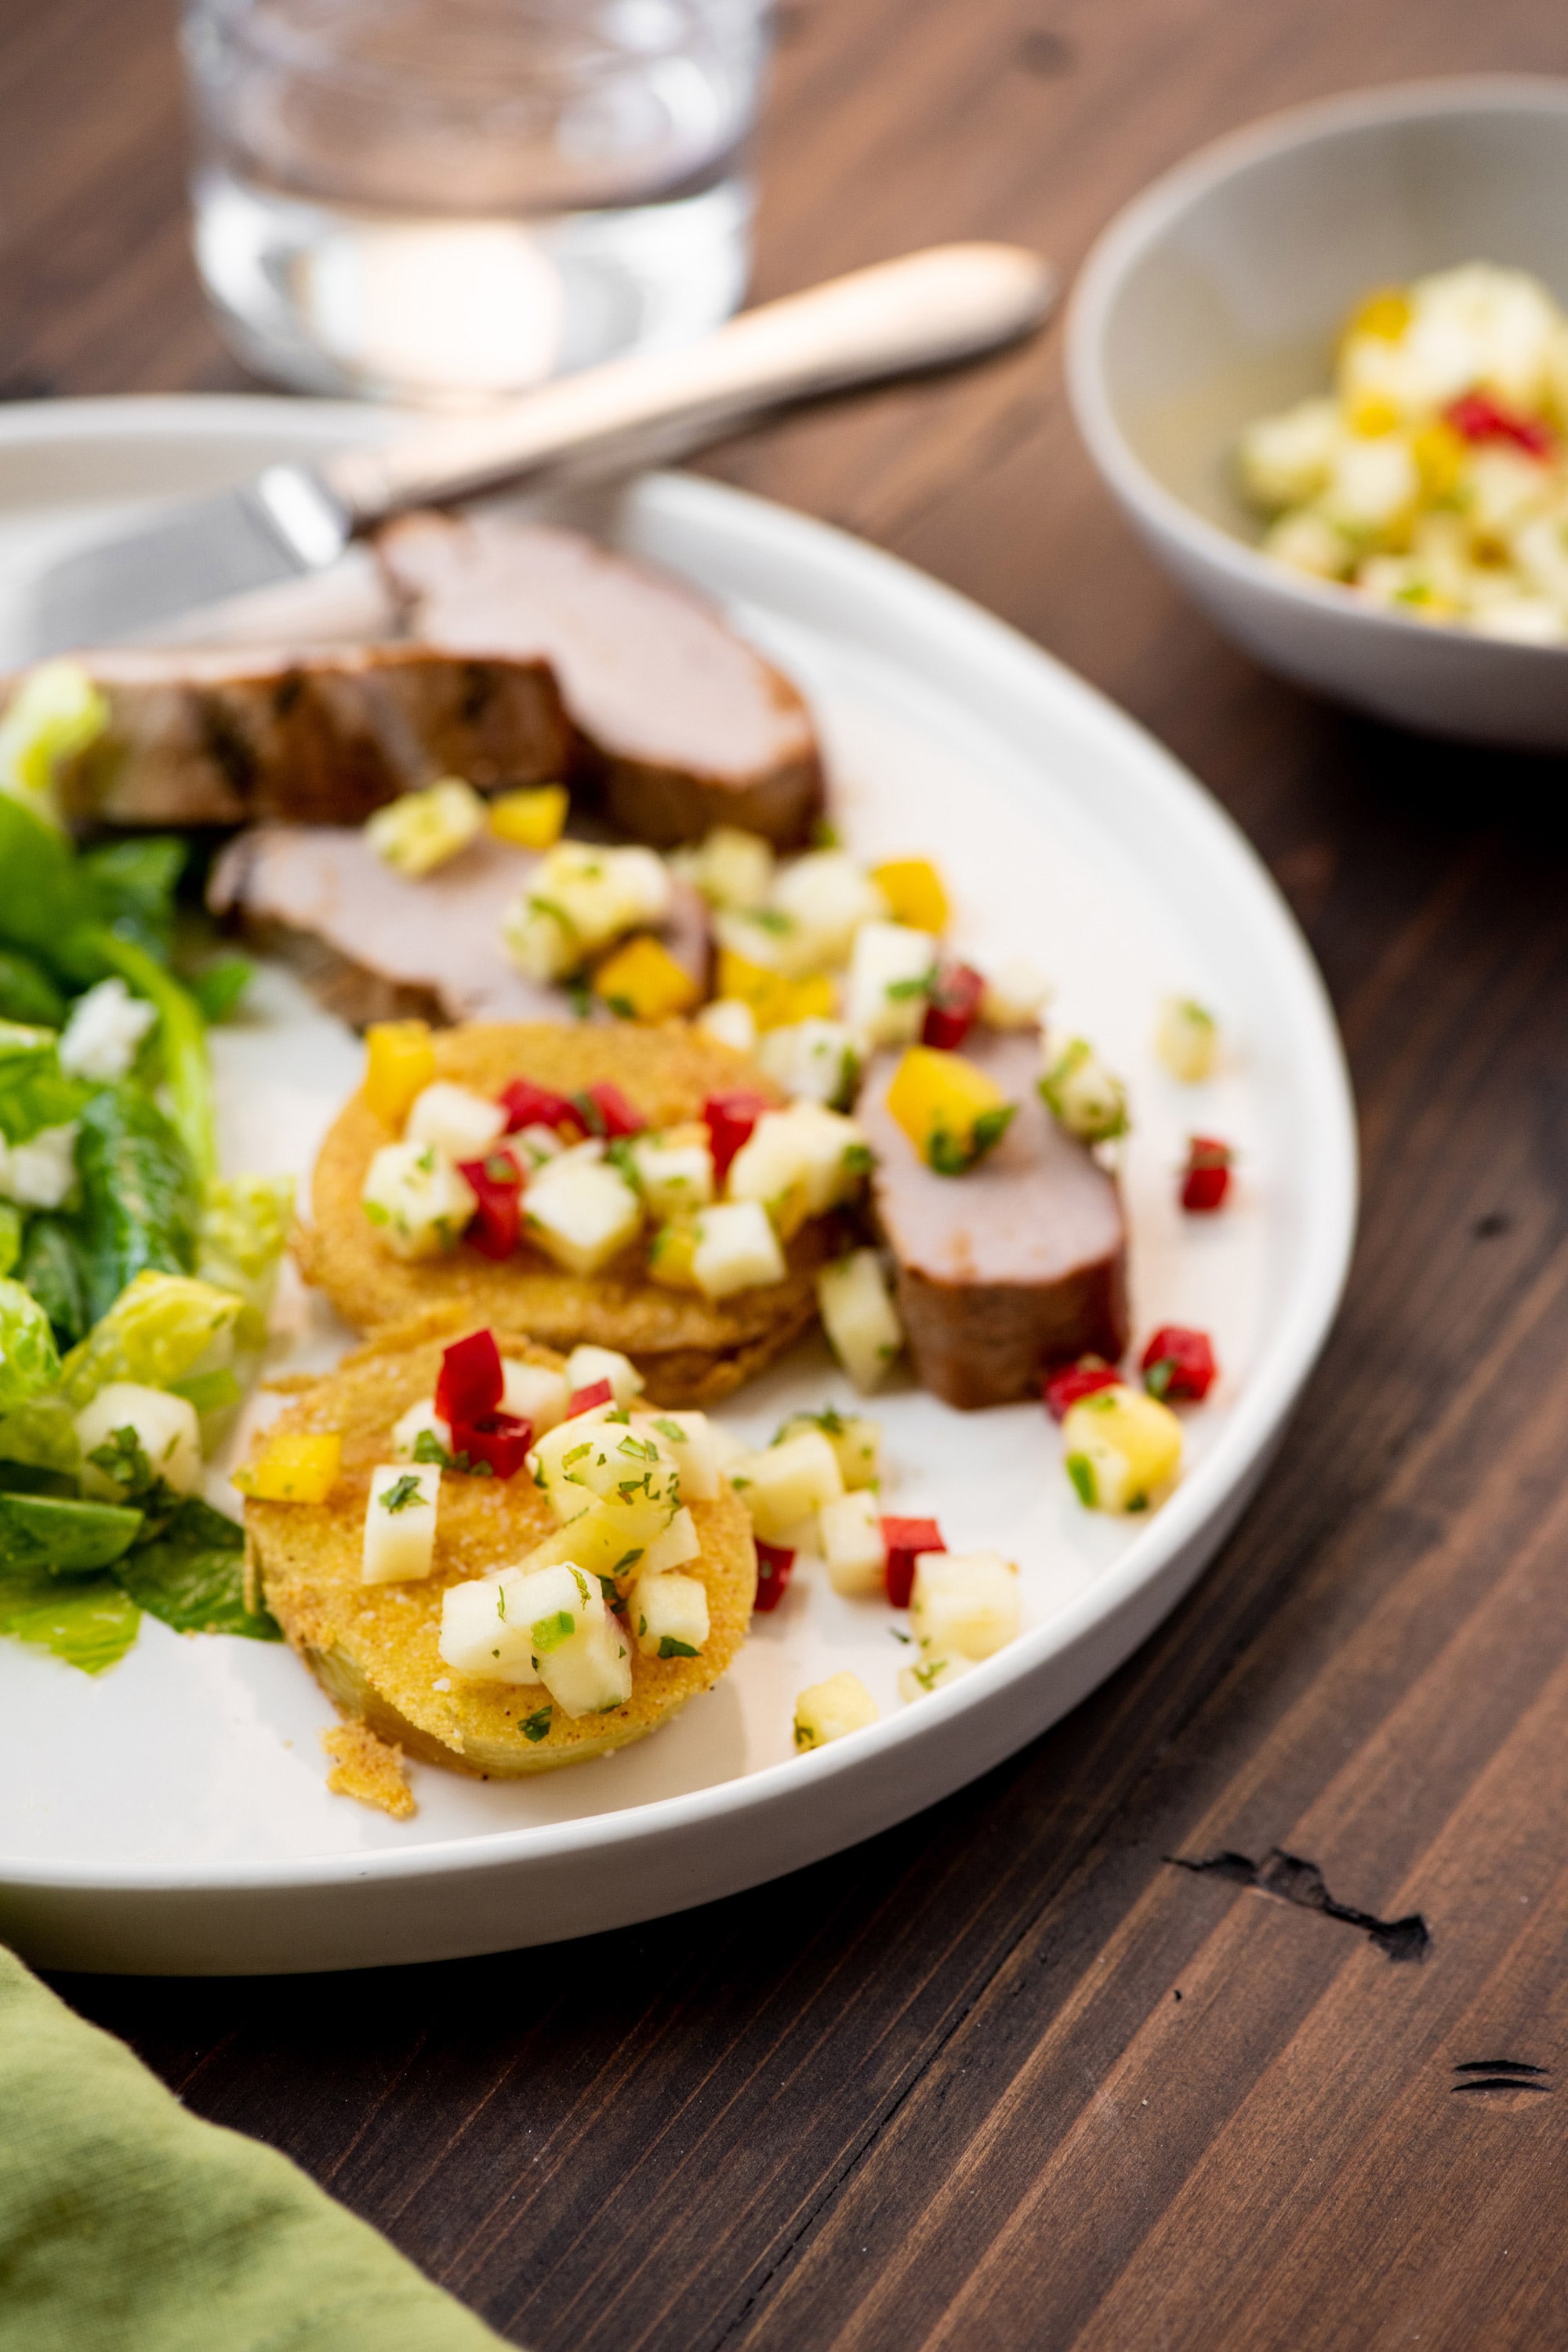 Pineapple-topped fried green tomatoes with sliced pork loin on plate.